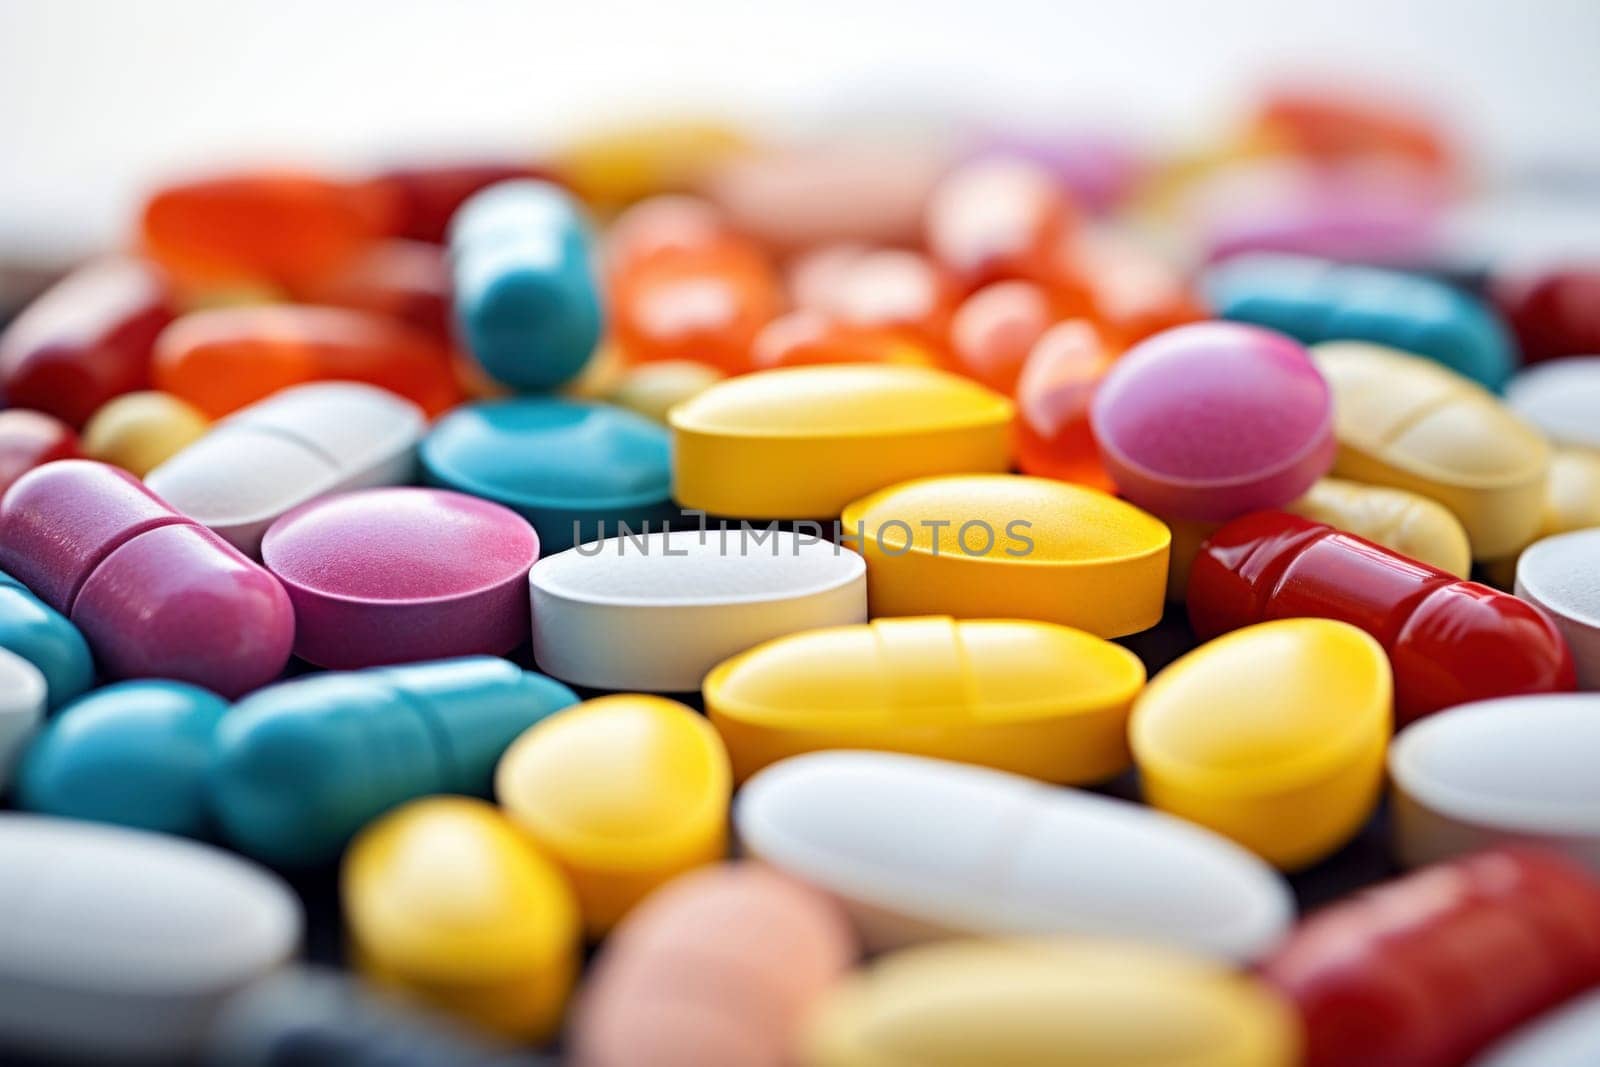 Close up of various colorful pharmaceutical pills and capsules